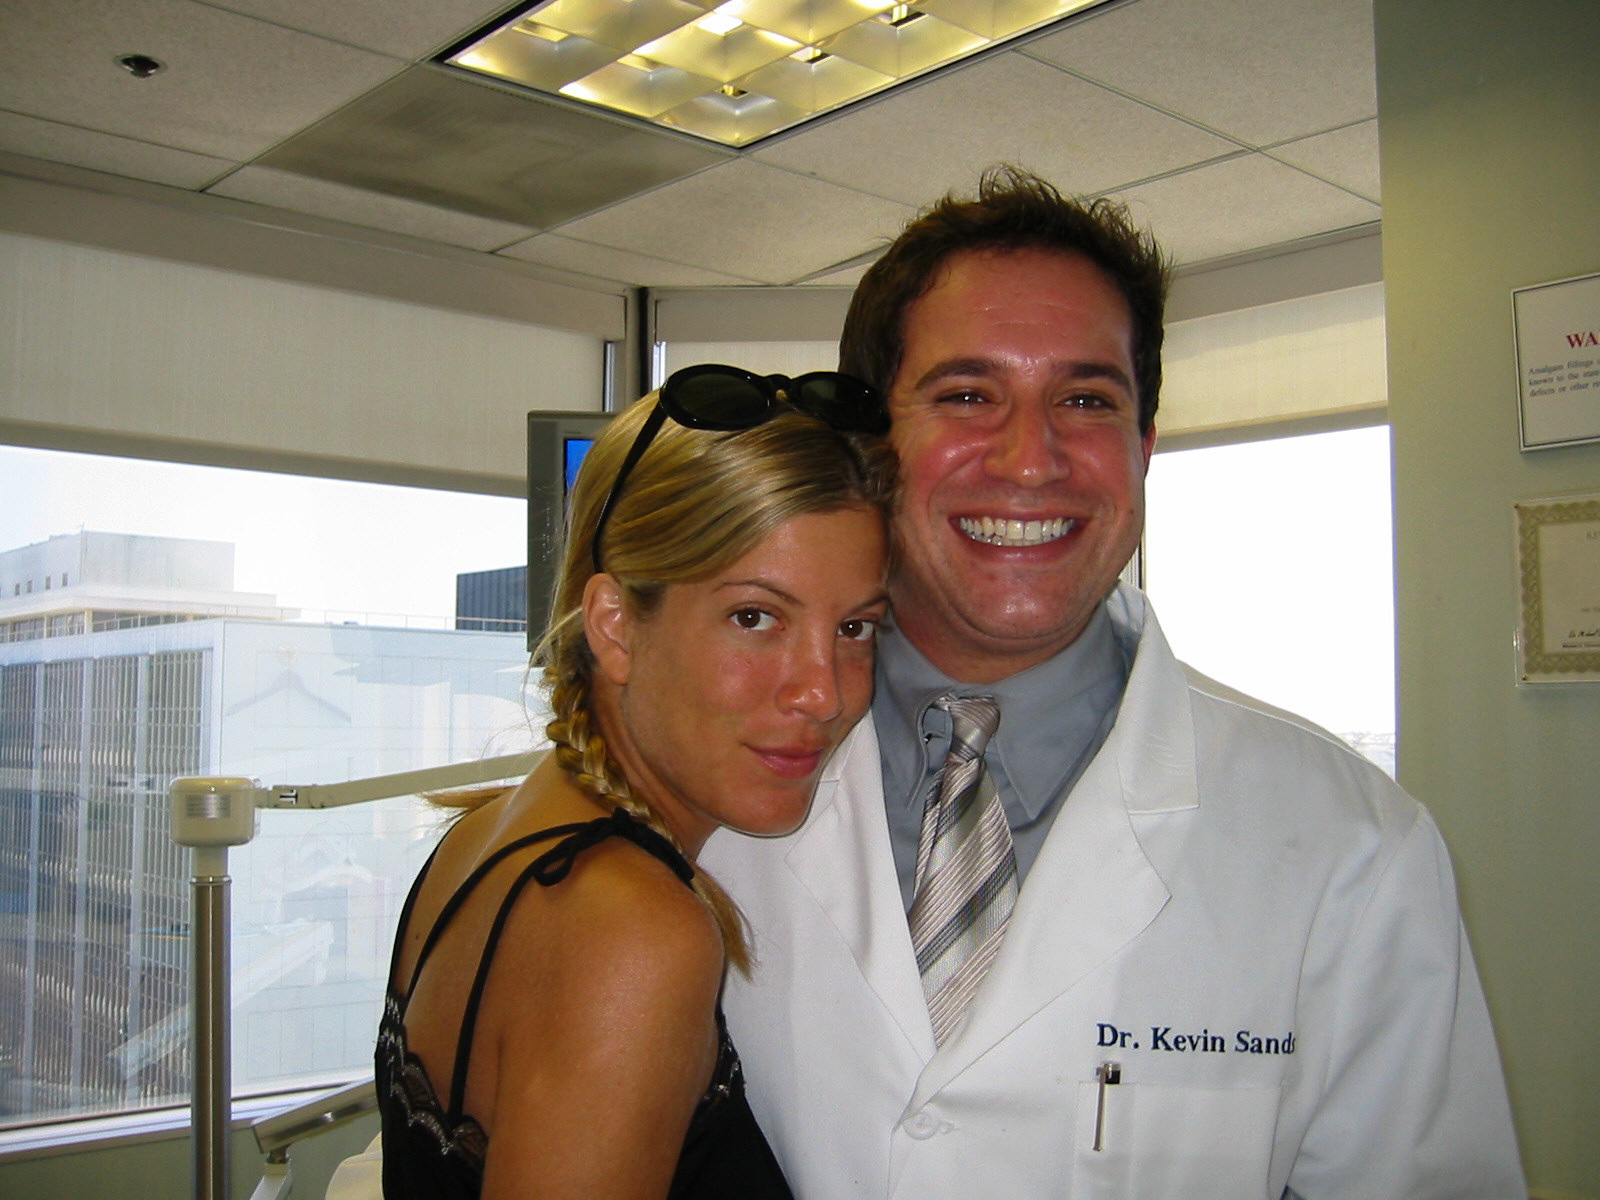 Dr. Kevin Sands with Tori Spelling